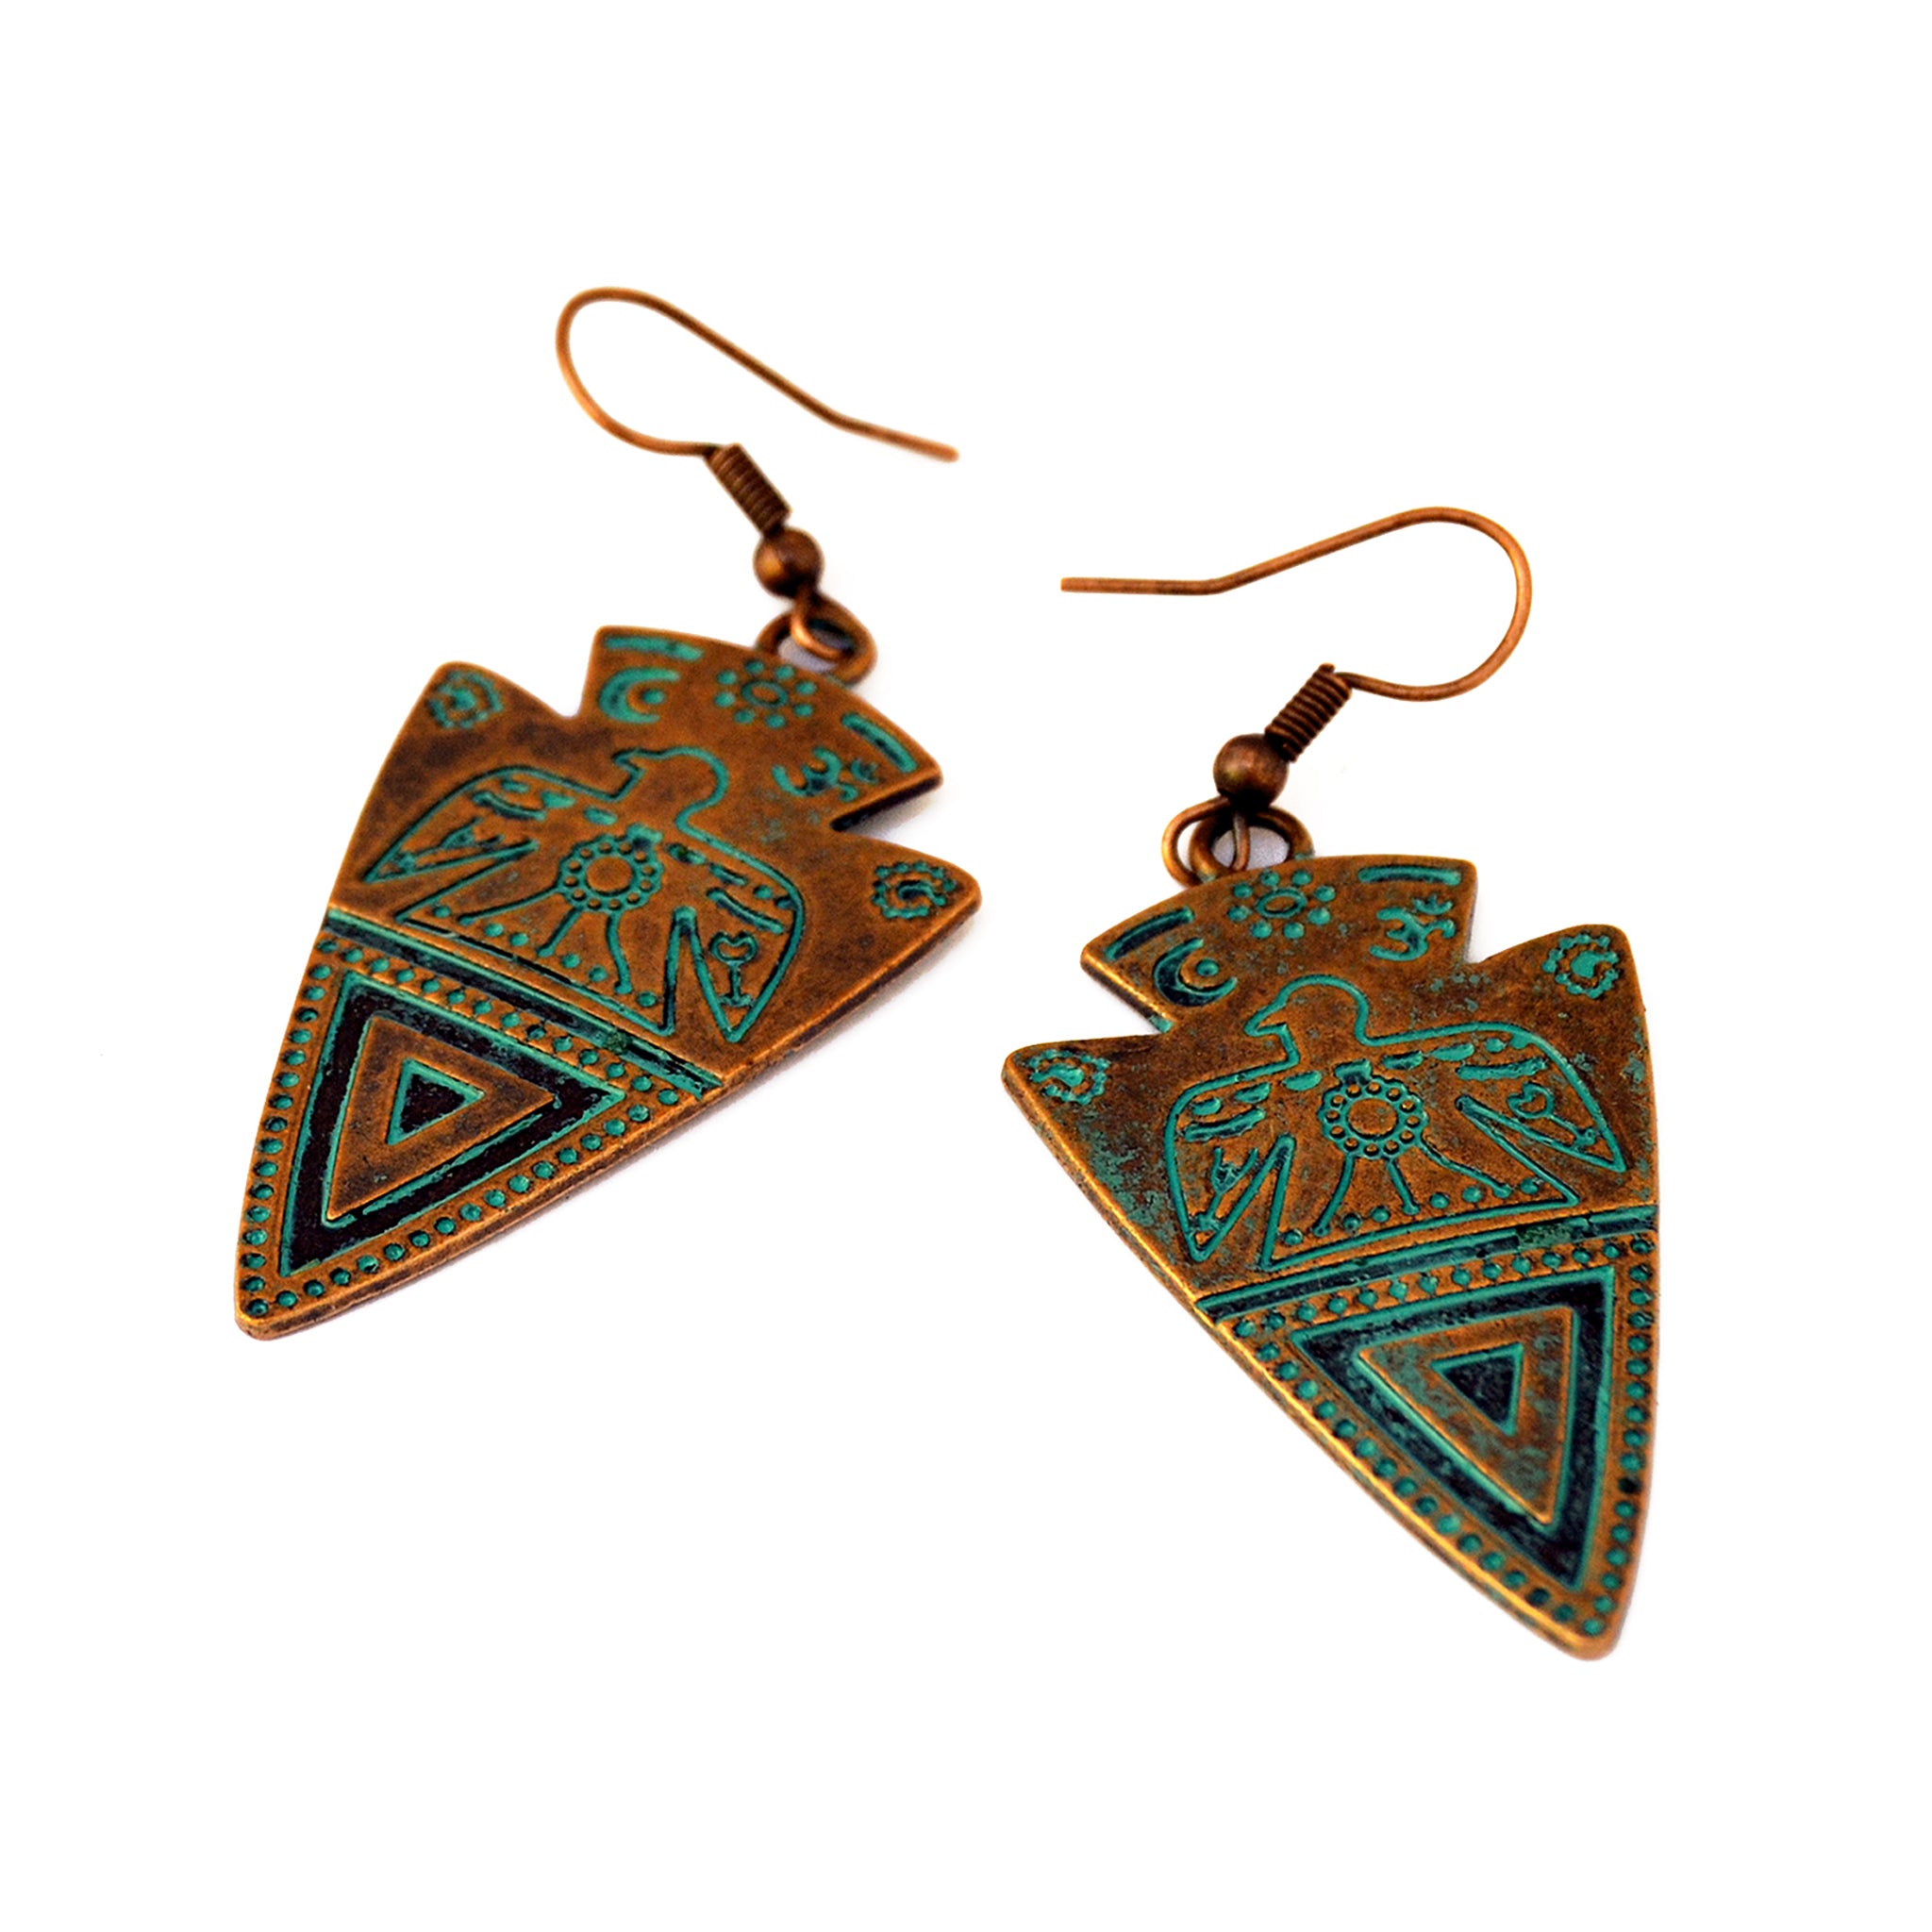 Ancient mexico earrings